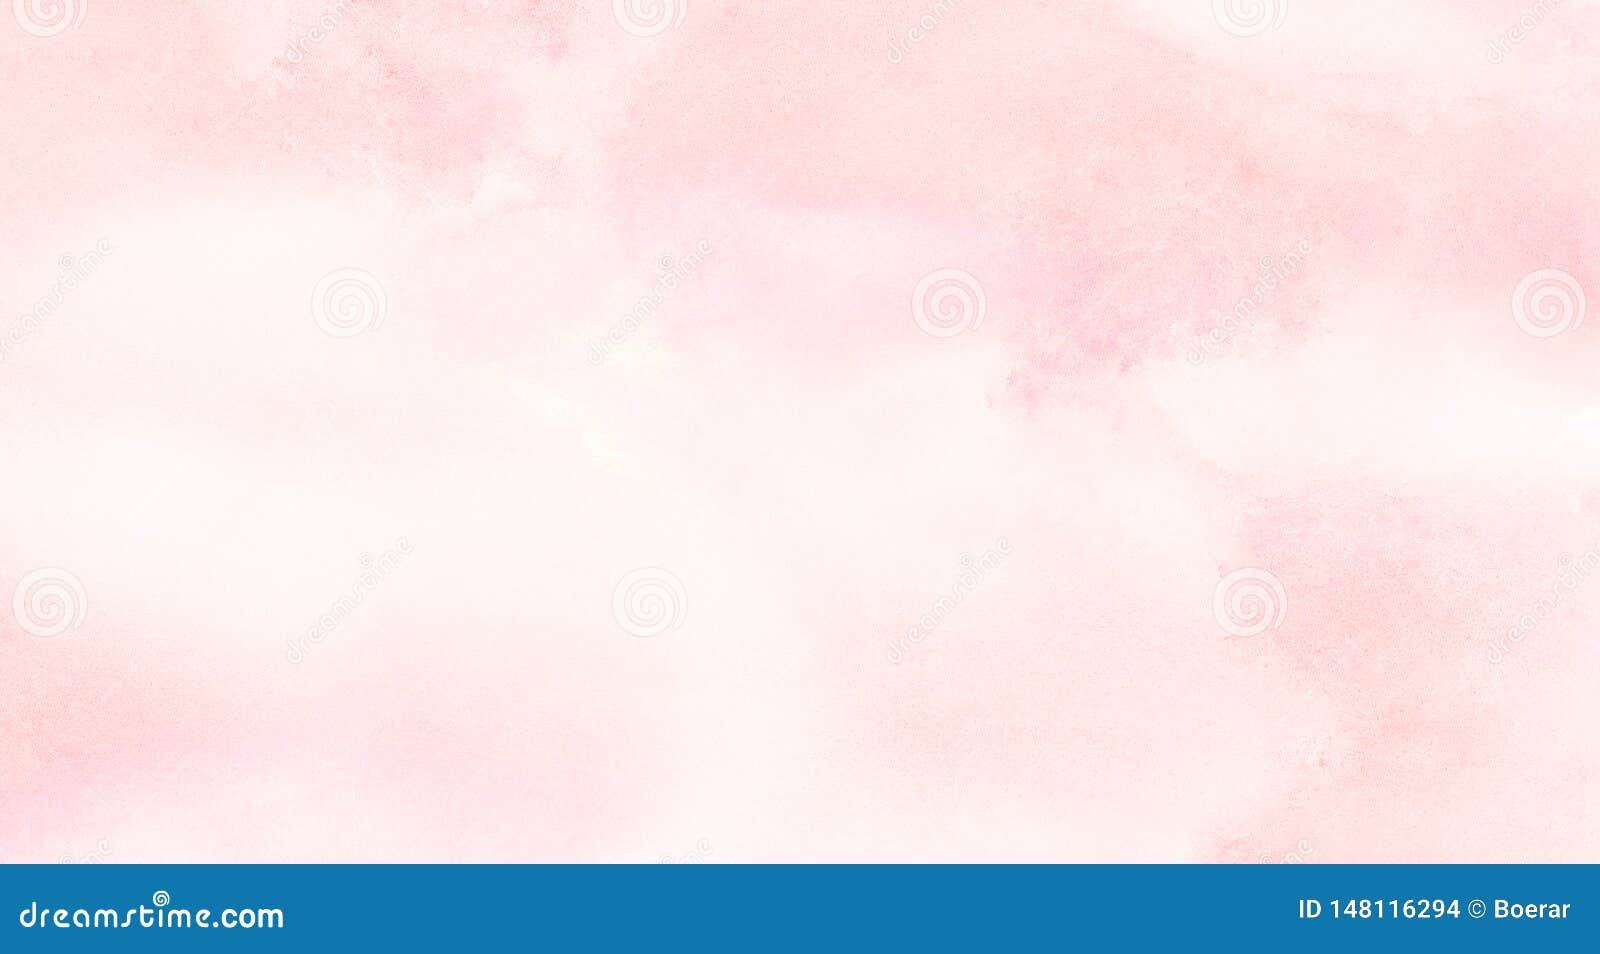 Ink Effect Light Pink Color Shades Watercolor Gradient